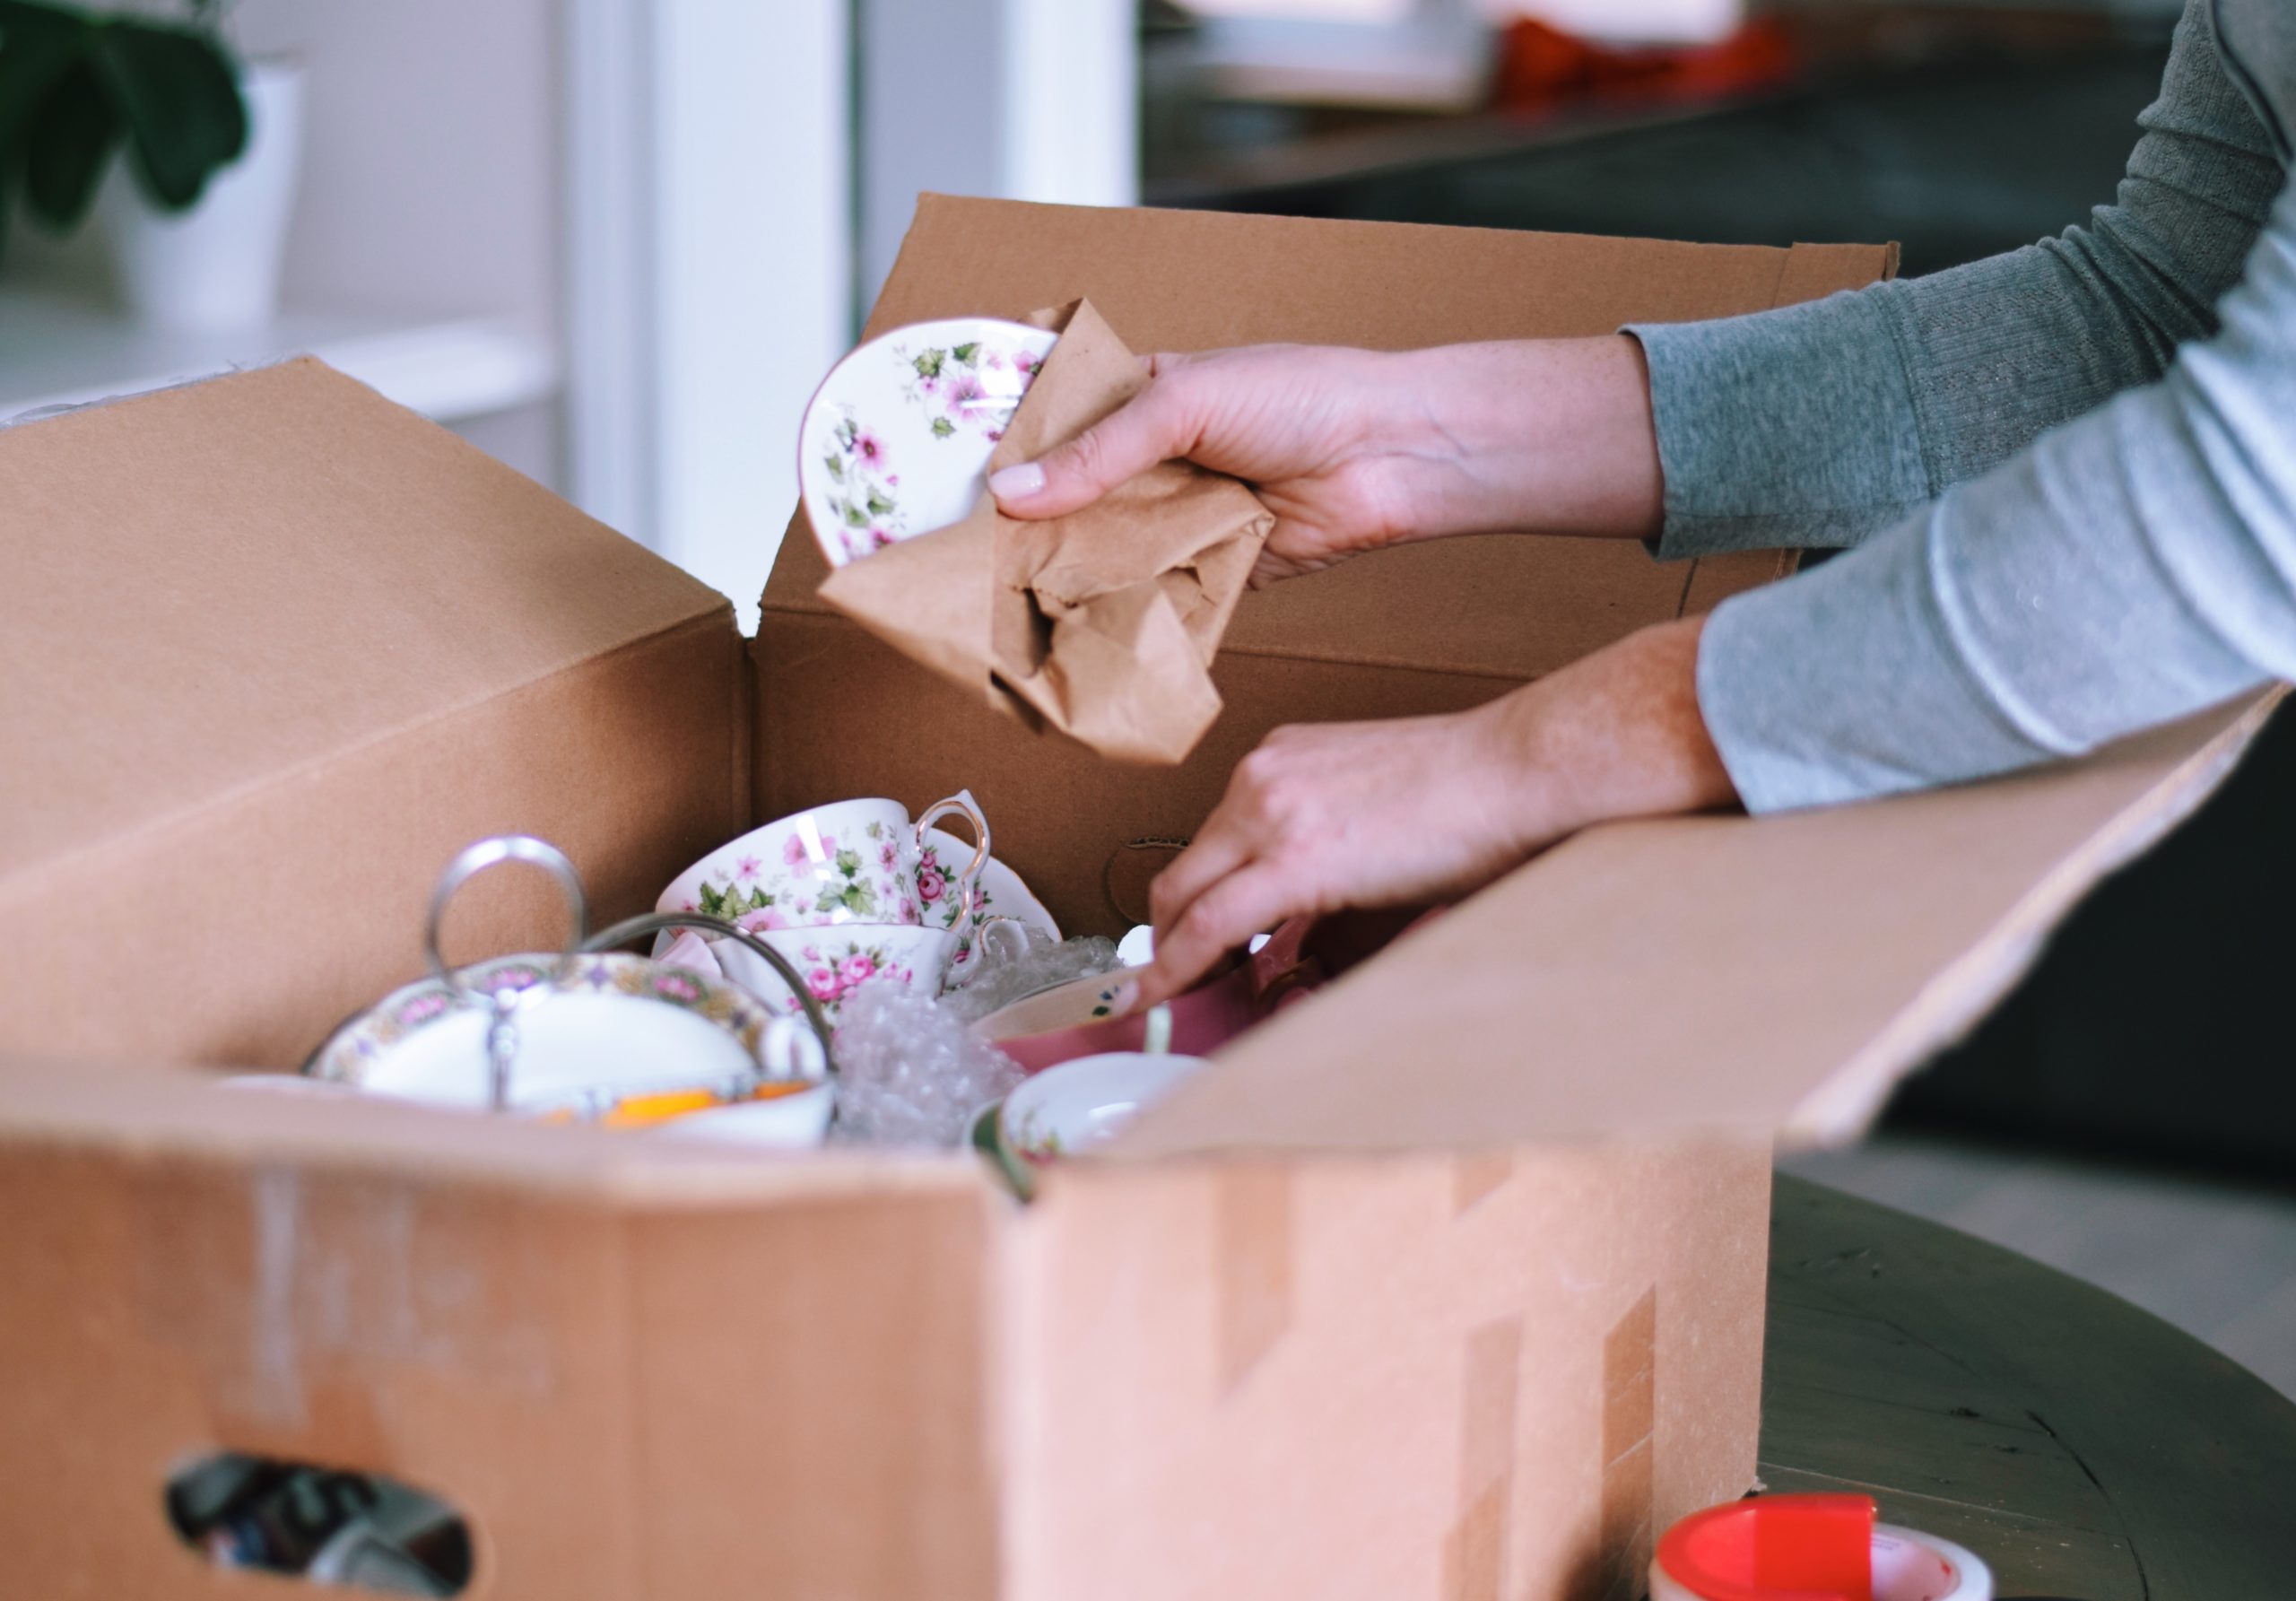 How To Pack Dishes For Moving Without Newspaper (8 Alternatives)